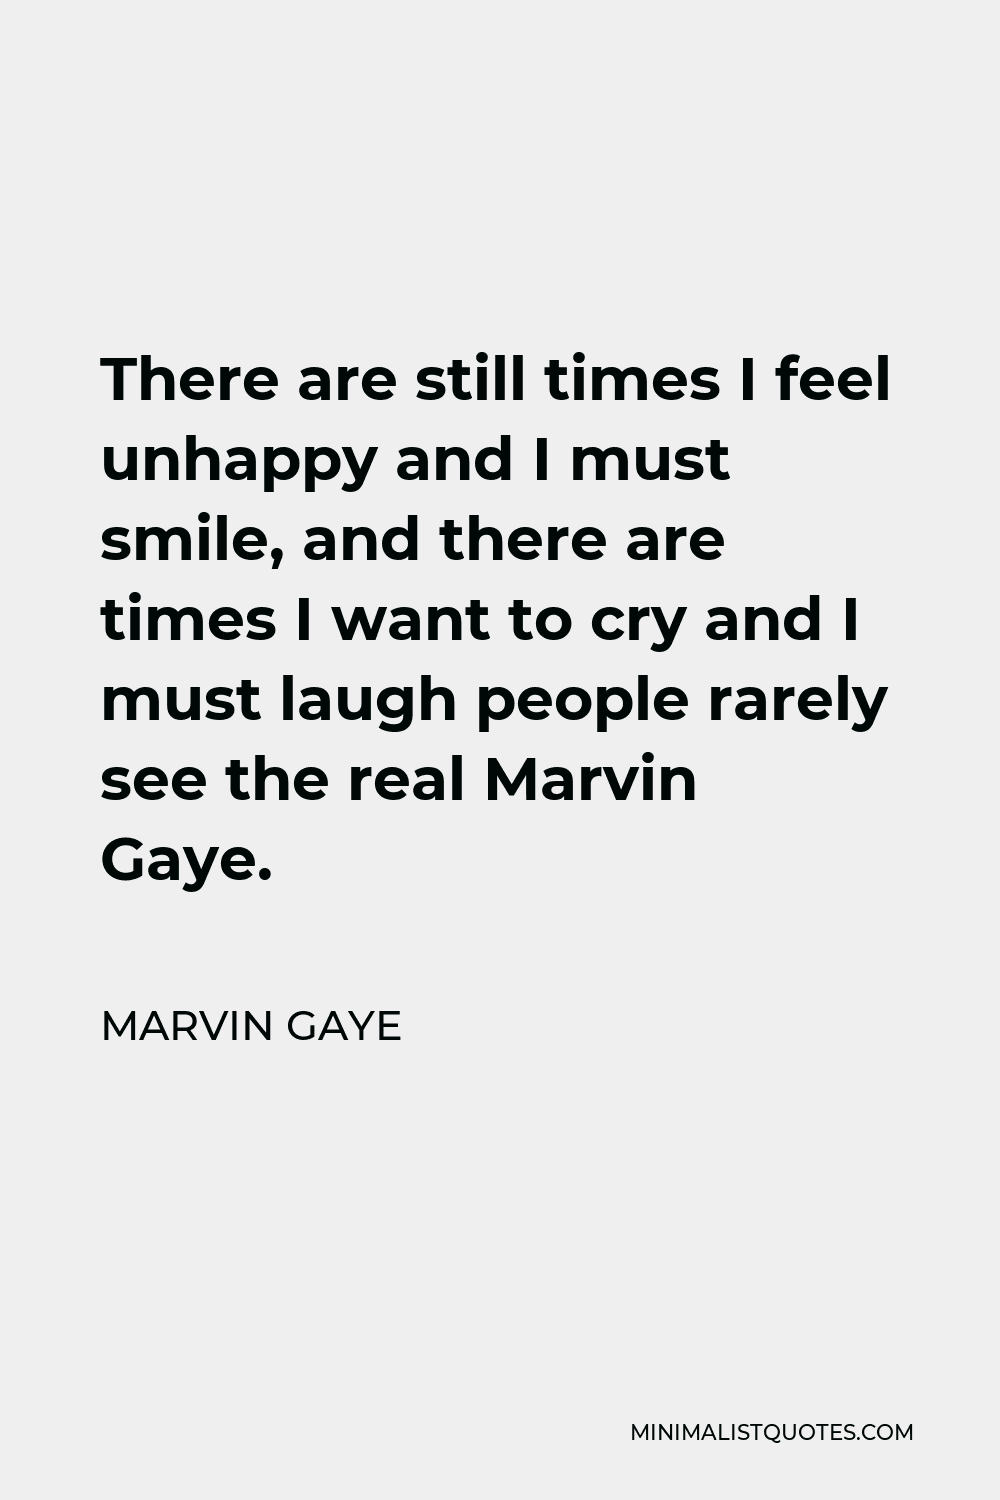 Marvin Gaye Quote - There are still times I feel unhappy and I must smile, and there are times I want to cry and I must laugh people rarely see the real Marvin Gaye.